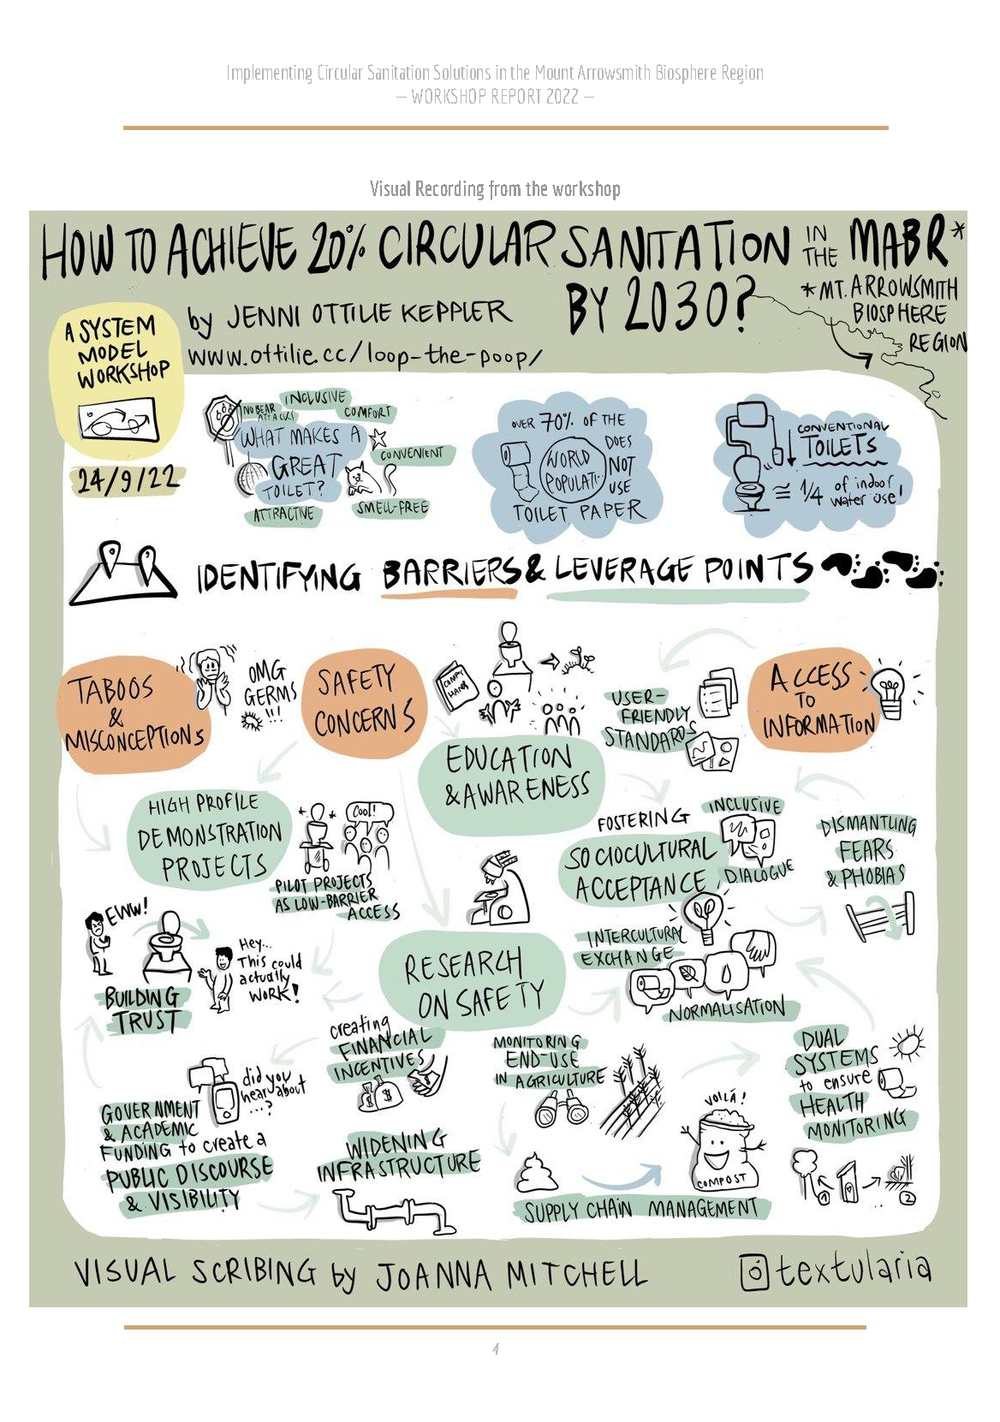 Circular Sanitation in the MABR - Evaluation Workshop Report – September 2022[FINAL]_02_Seite_04.png